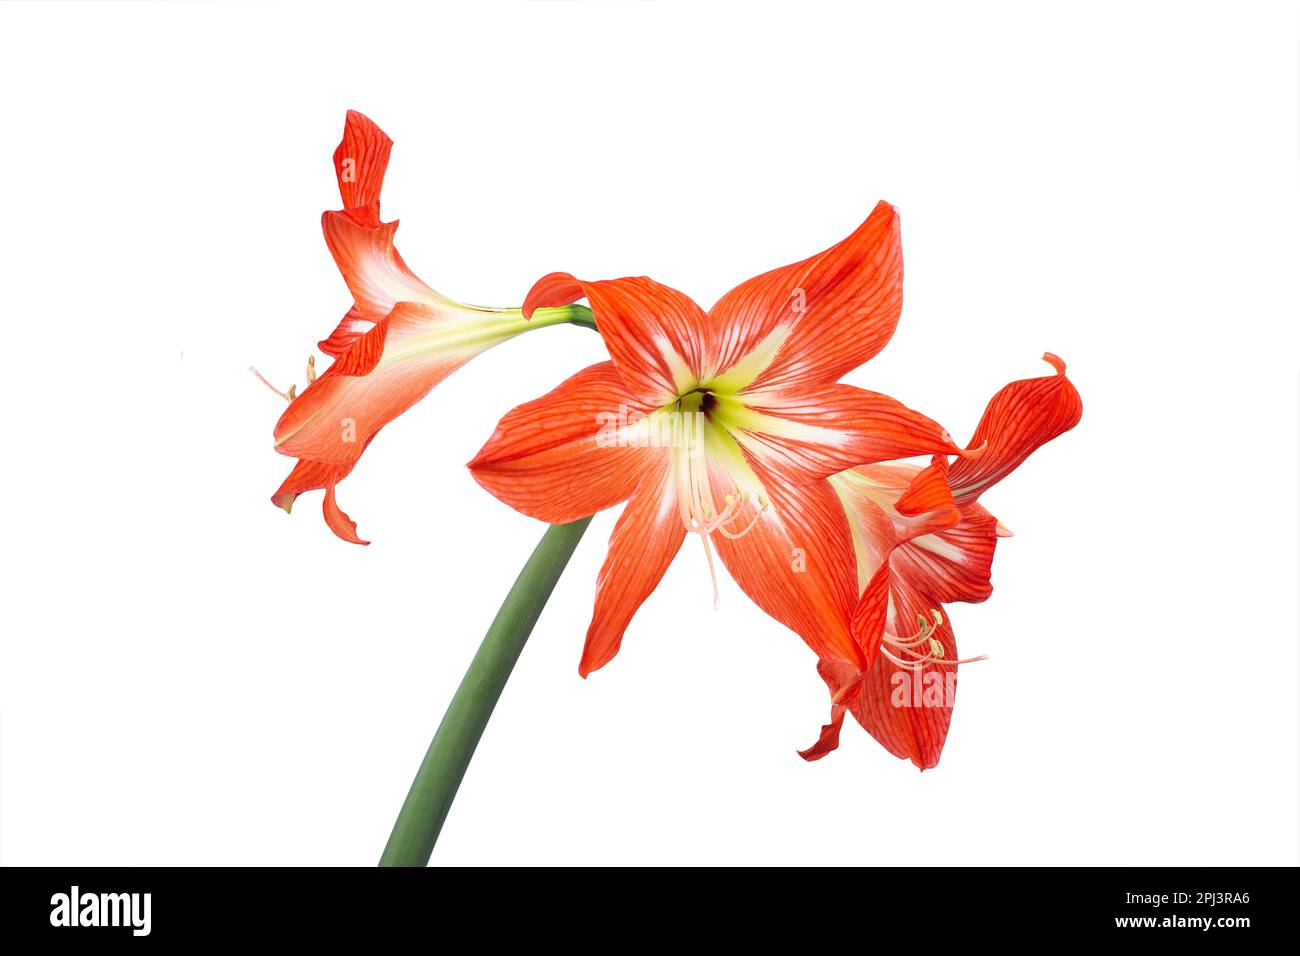 Bright red amaryllis flower on a white background macro photography. Blooming amaryllis with scarlet petals close up photo. Isolated photo of a red li Stock Photo